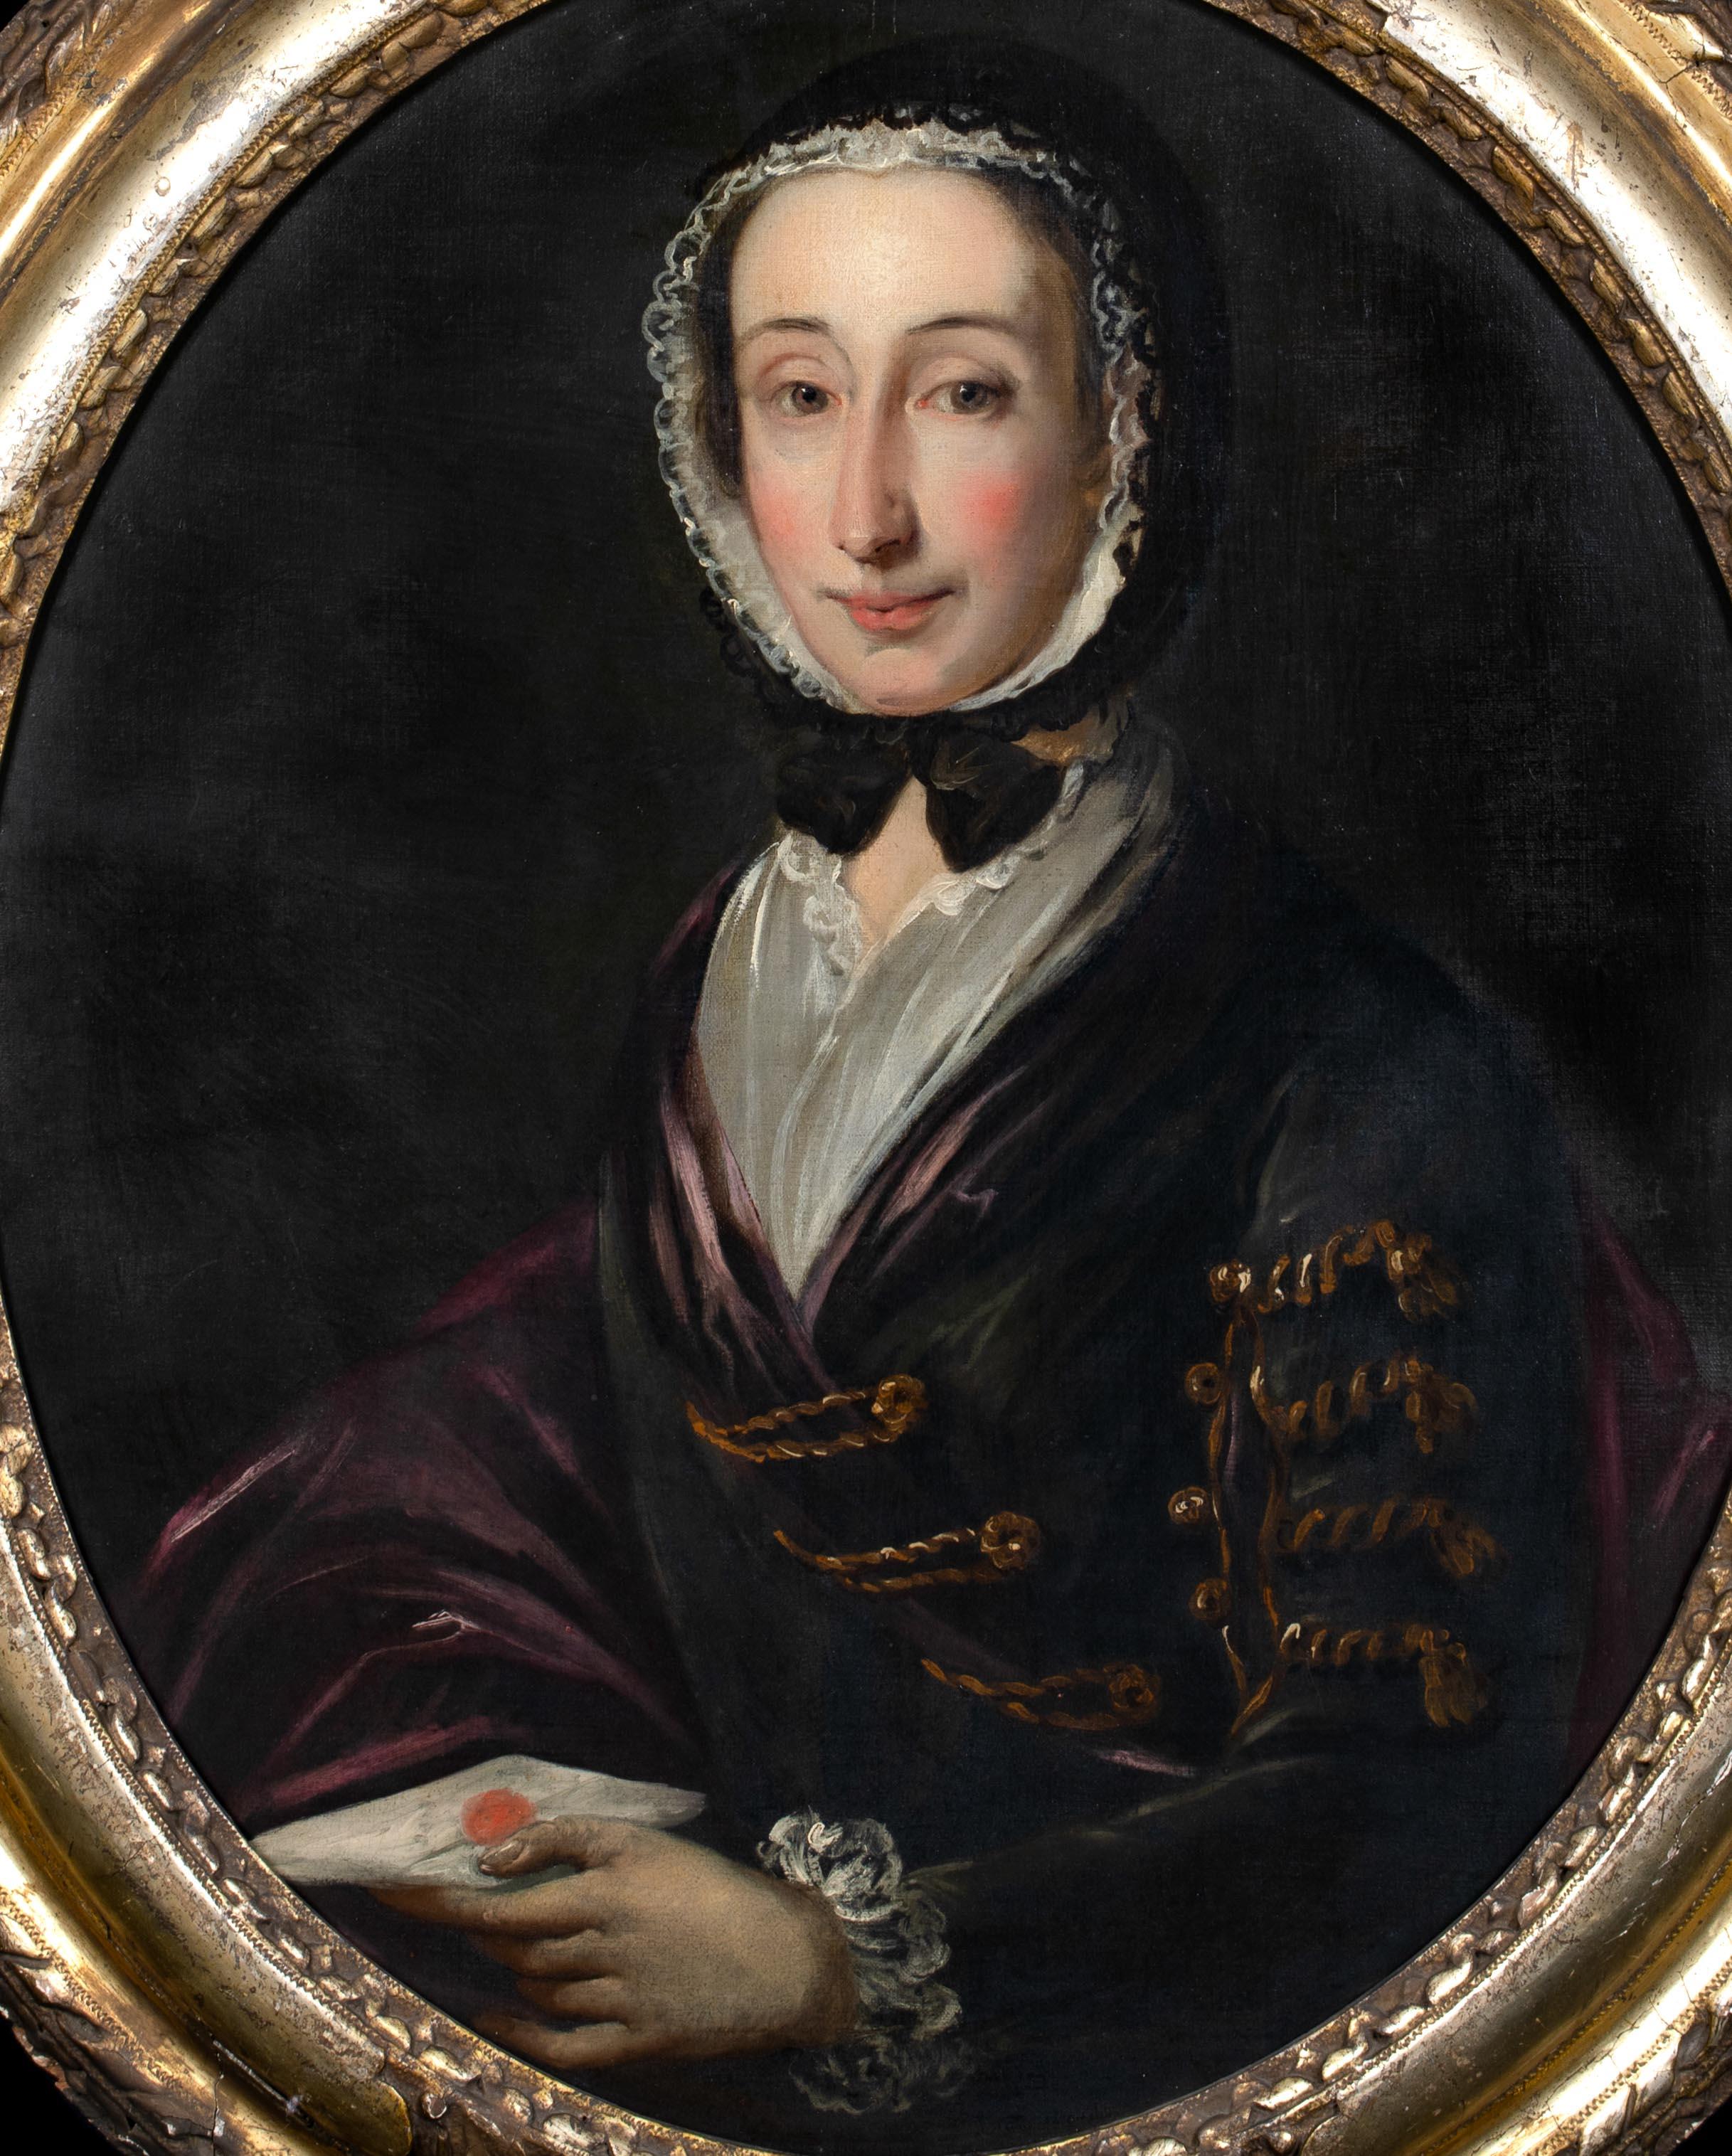 Portrait Of Lady Elizabeth Carnegie, 18th Century  by Anne Forbes (1745-1834) - Black Portrait Painting by Unknown